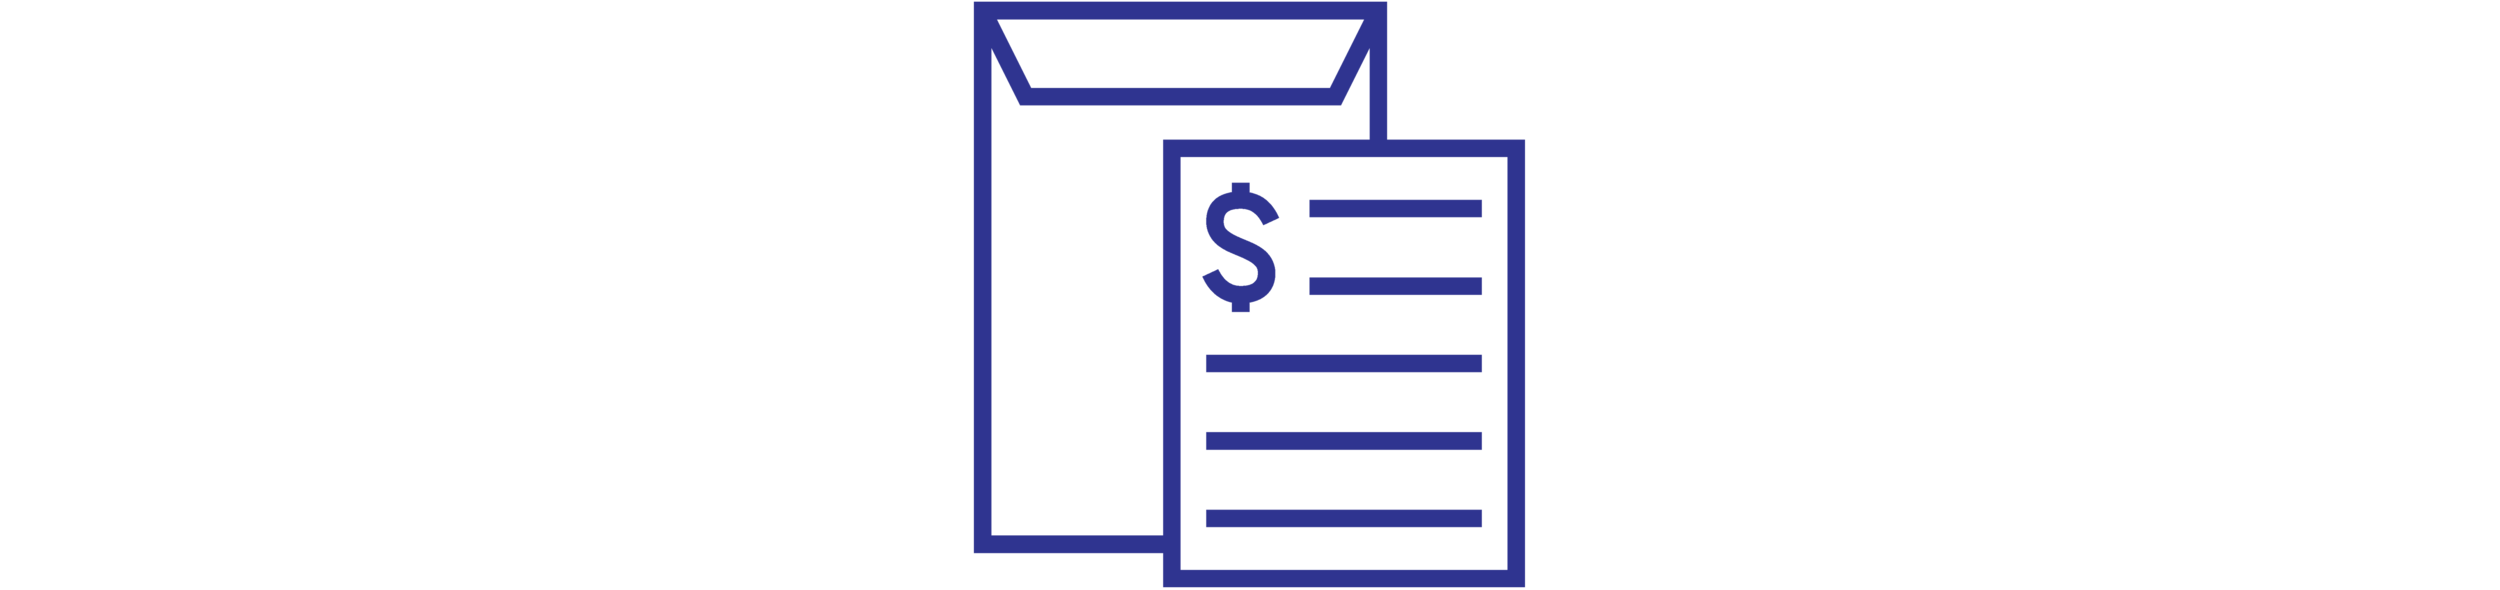 HPHA-category-icons-financial-assistance .png